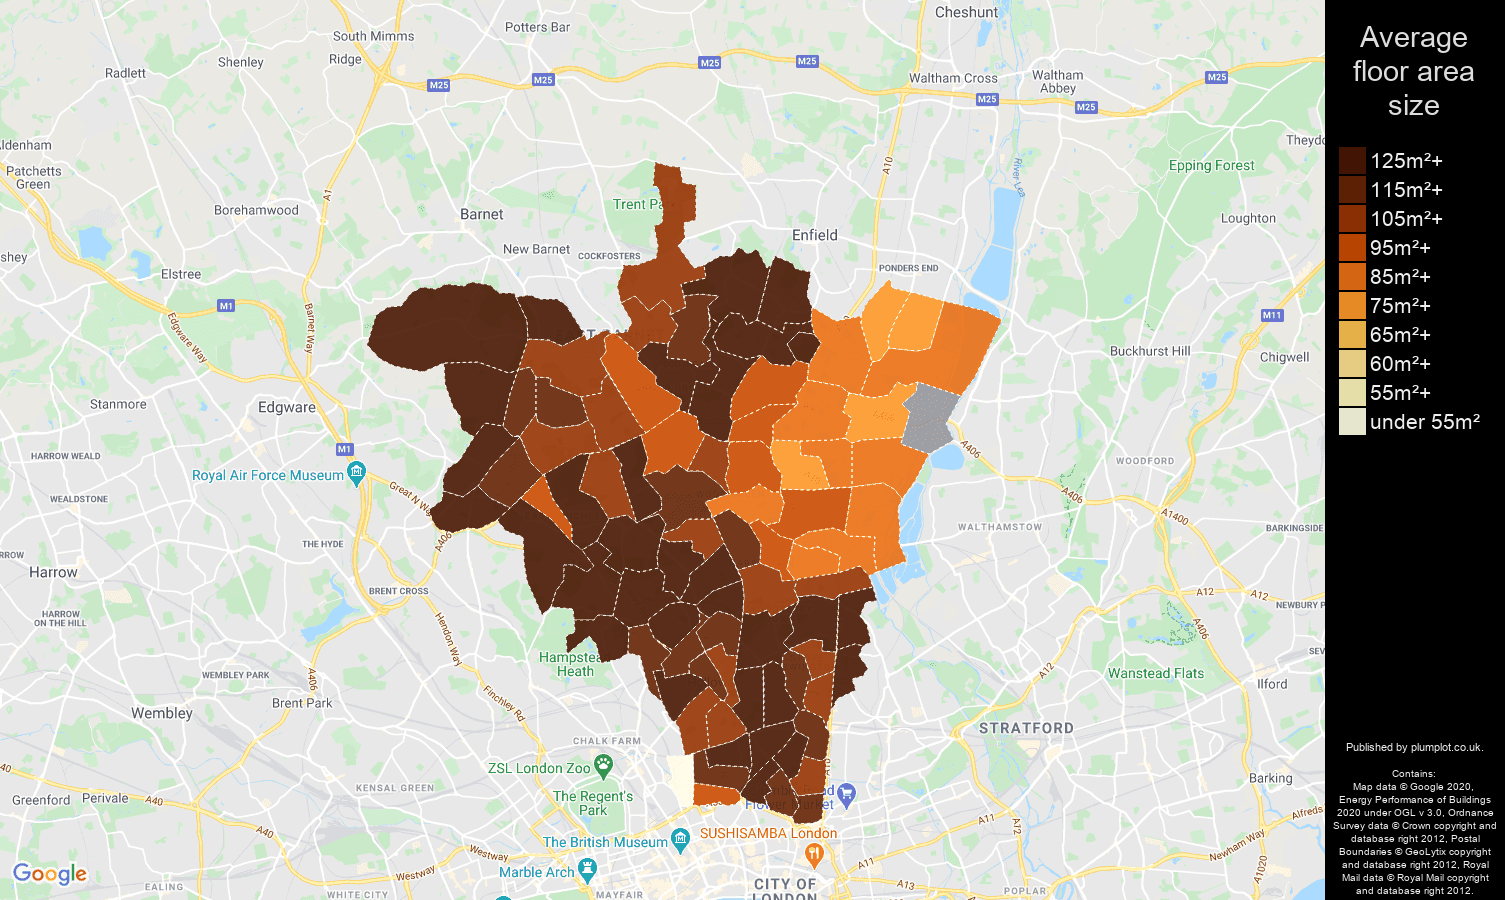 North London map of average floor area size of houses